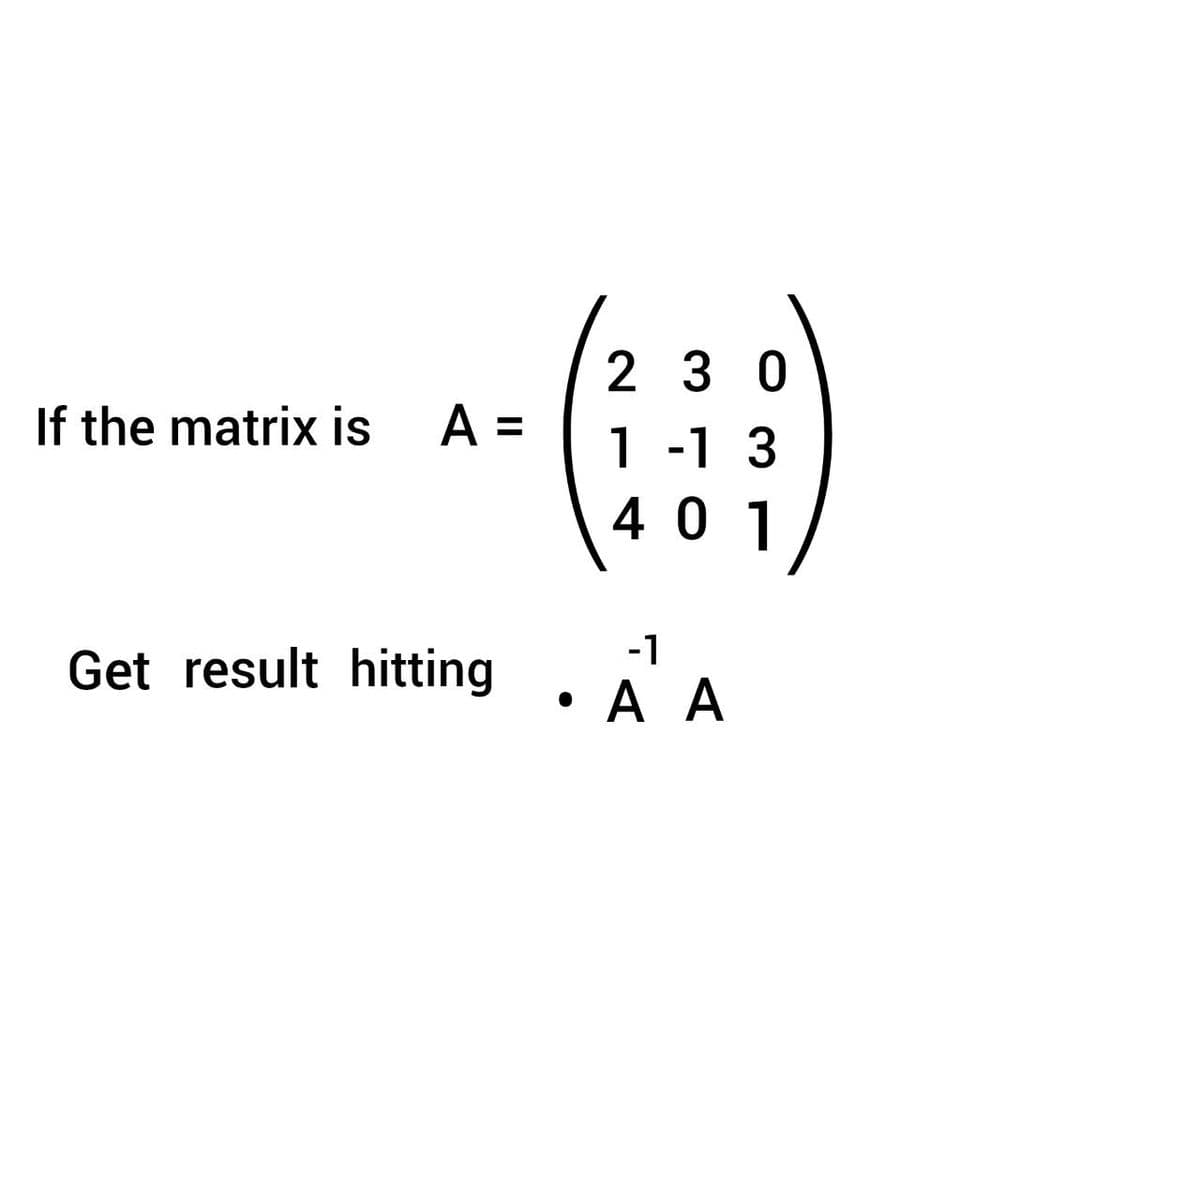 If the matrix is A =
Get result hitting
230
1 -1 3
401
-1
• A A
●